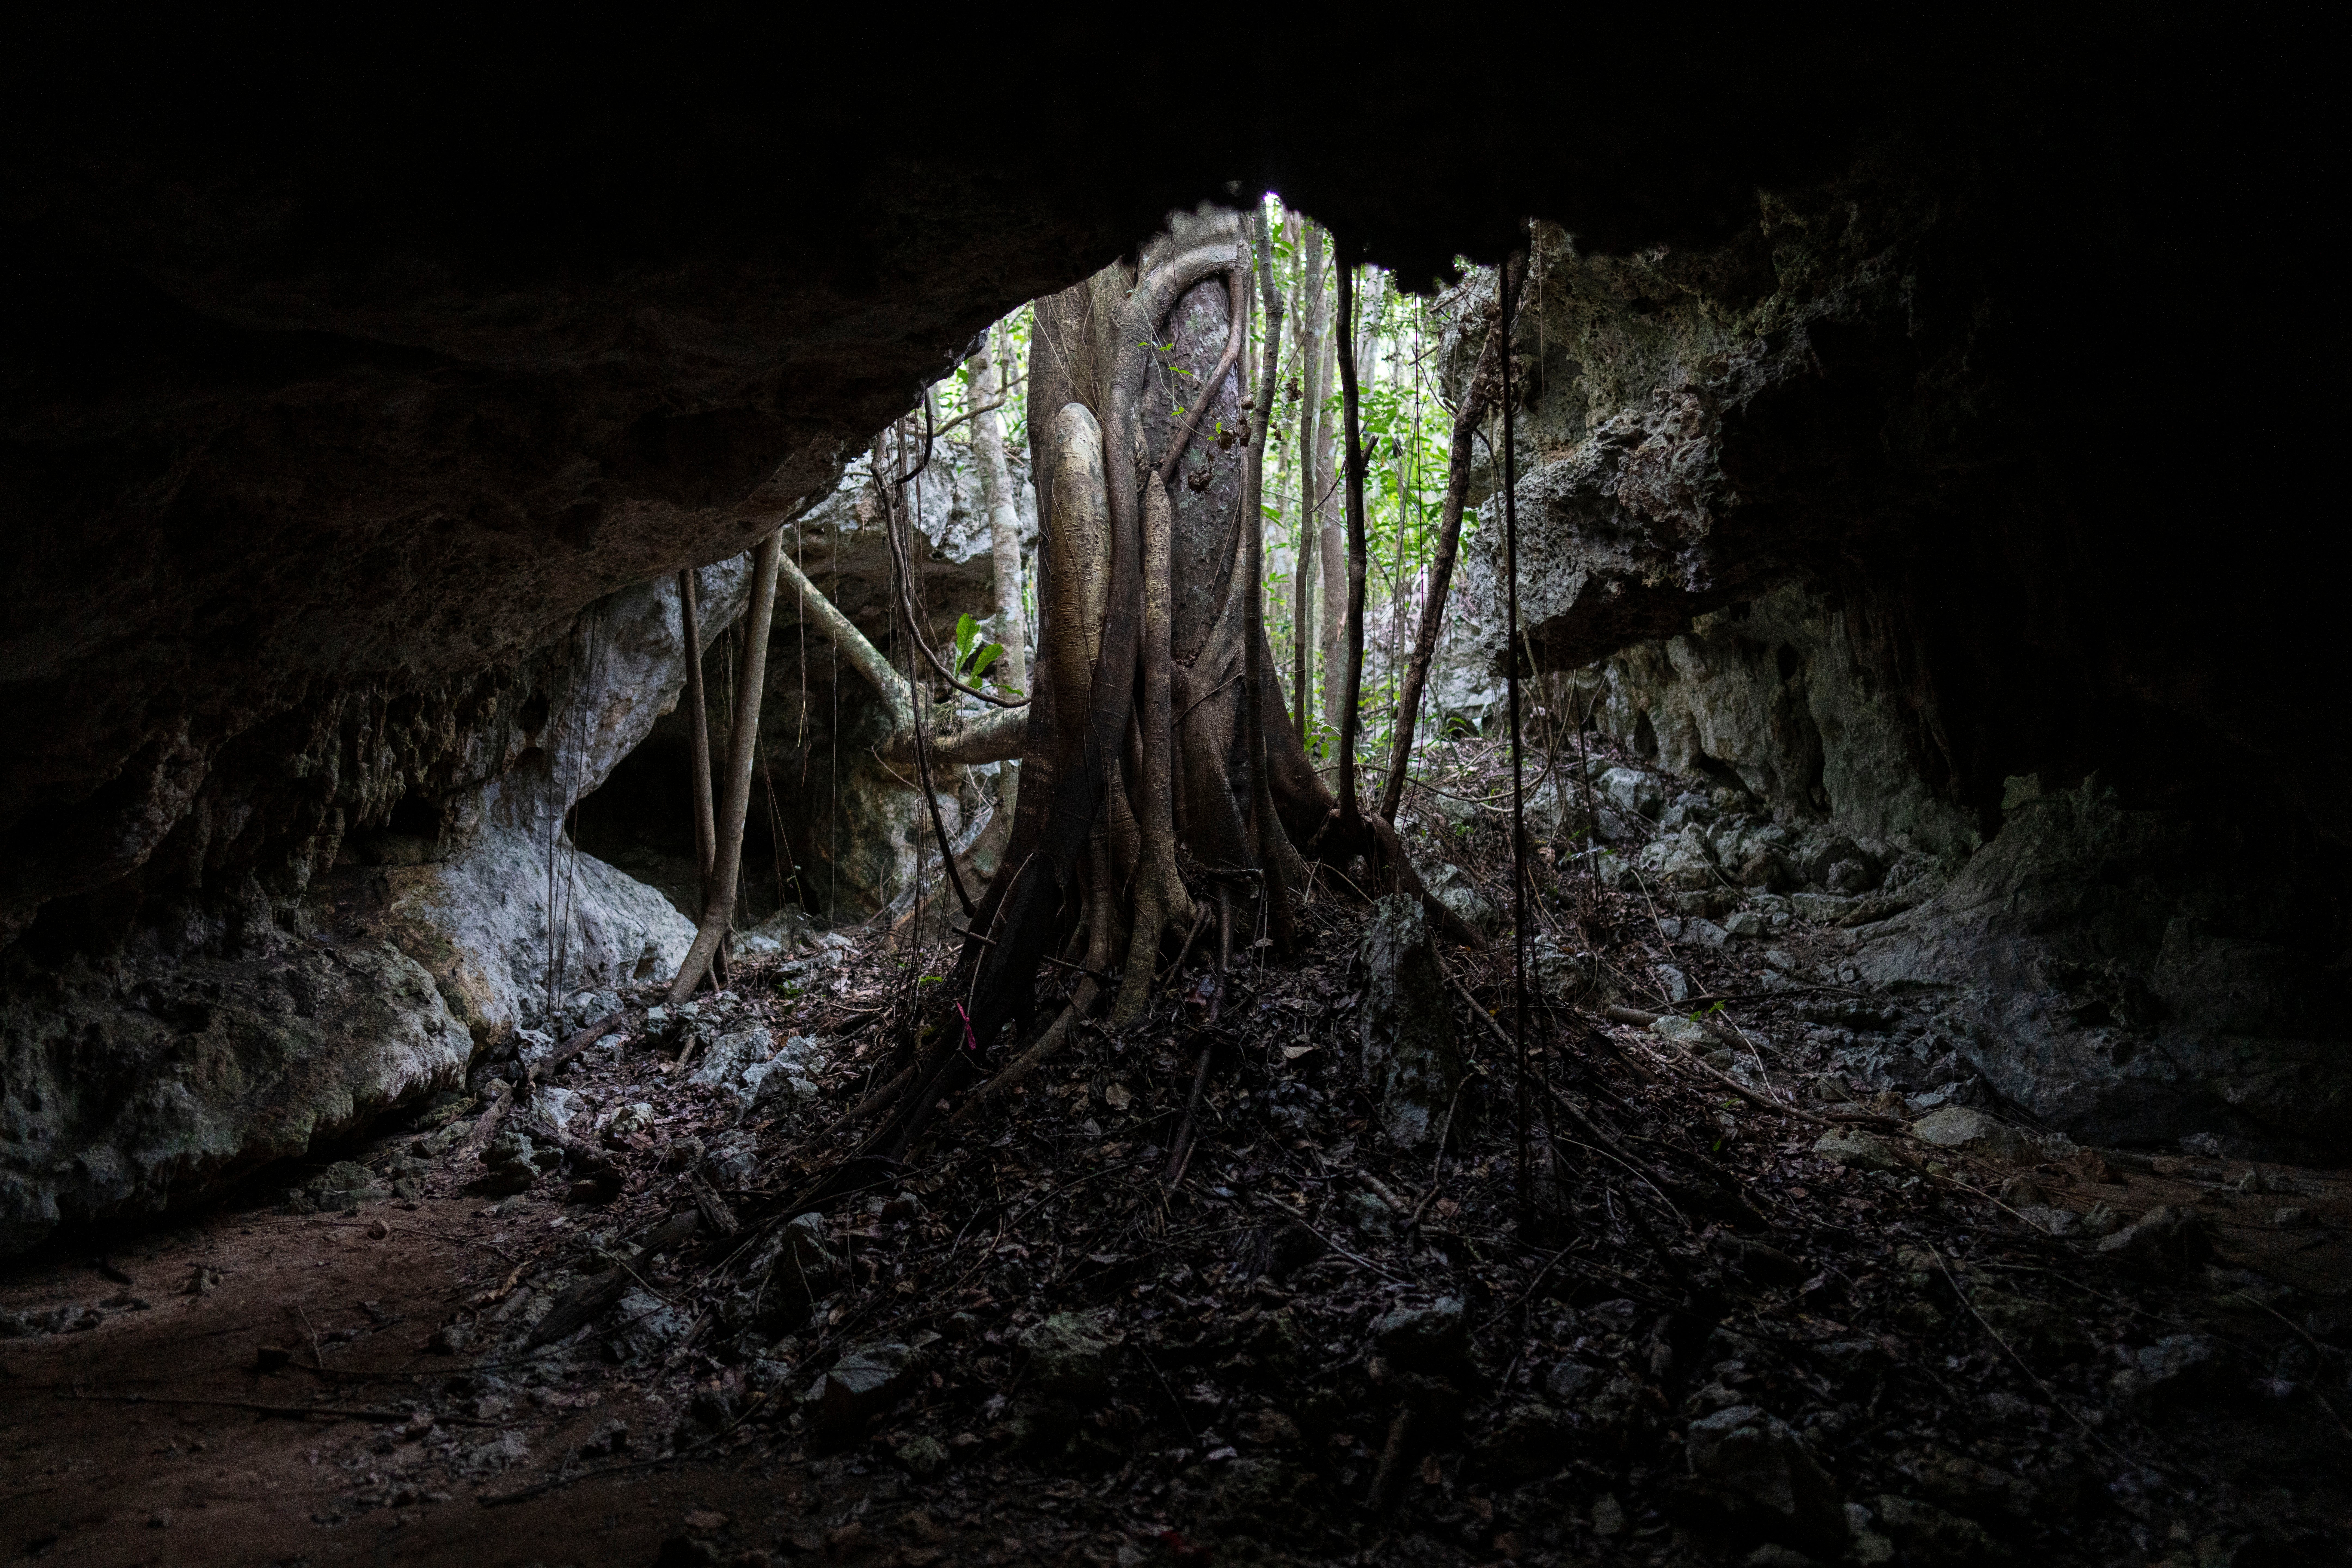 A tree protrudes from the cave system Jaguar Claw on the outskirts of Playa del Carmen